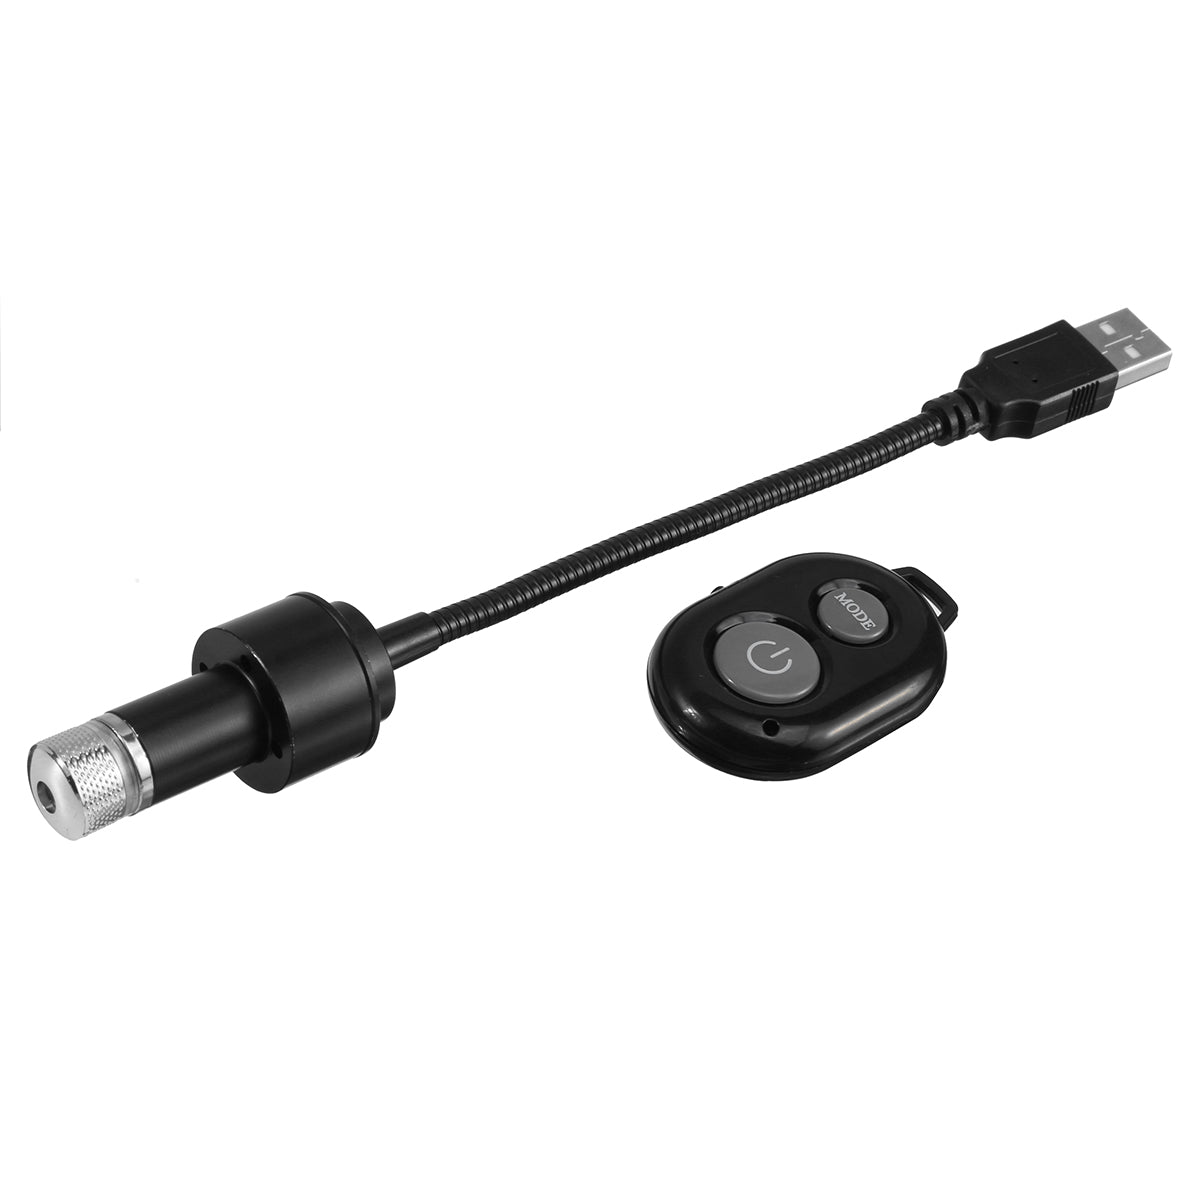 Black LED USB Car Atmospher Ceiling  Interior Ambient Star Light Lamp Pipe -4 Mode 5 Effect